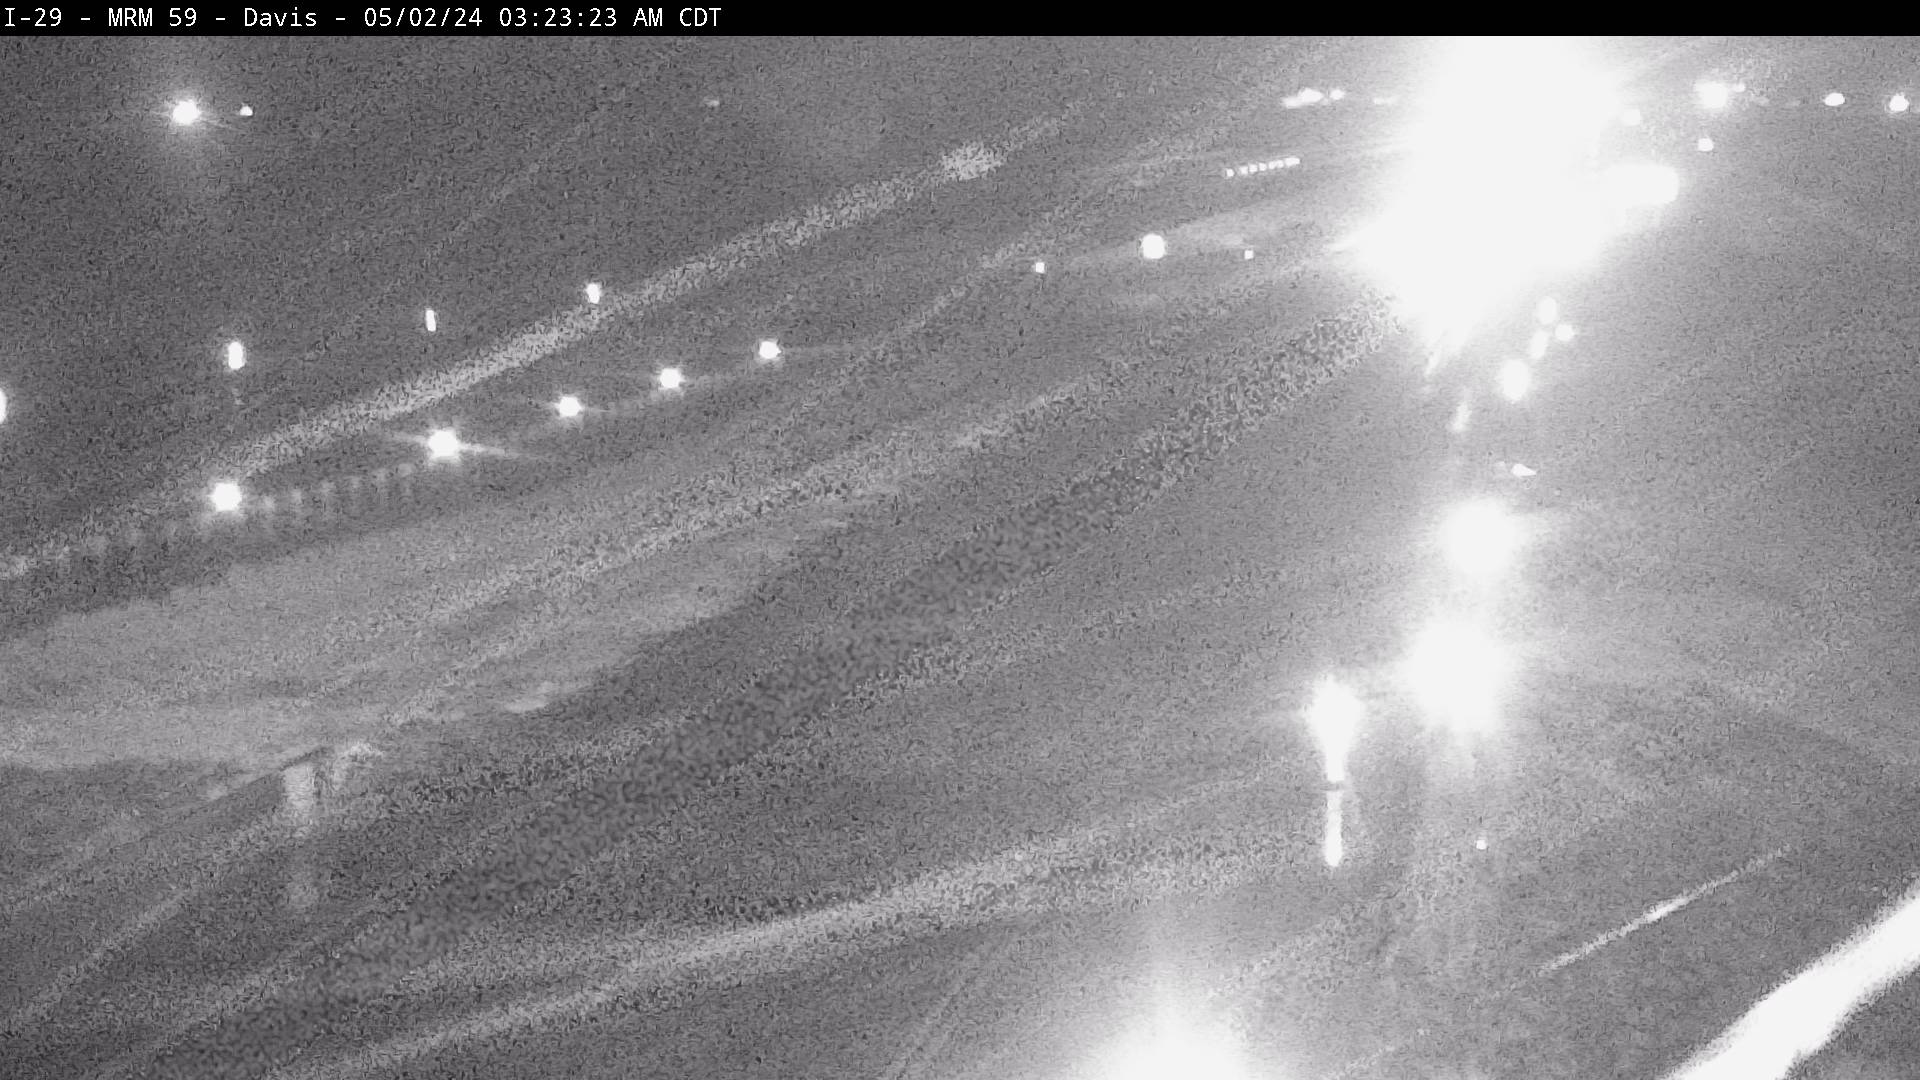 10 miles east of town along I-29 @ MM 59 - North Traffic Camera